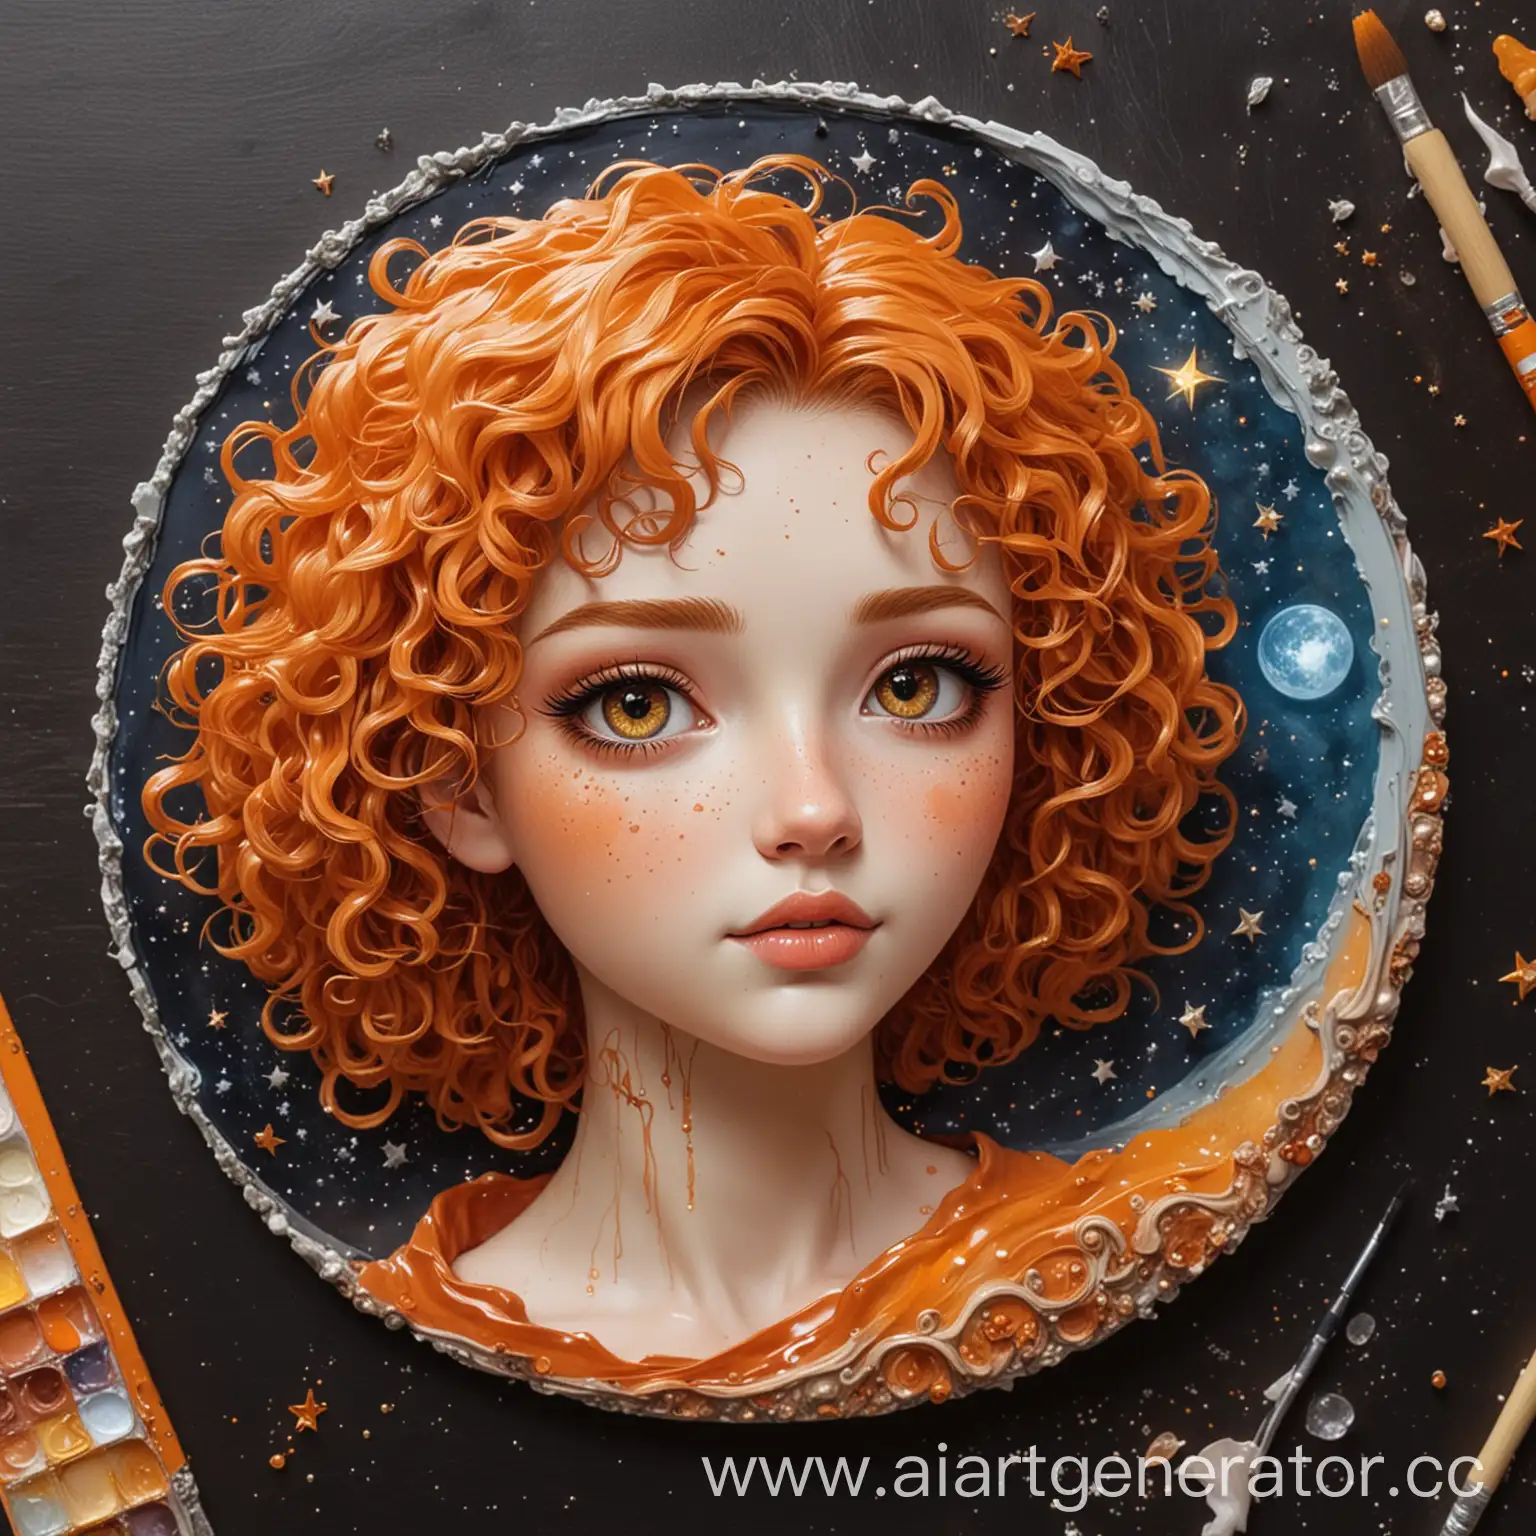 CurlyHaired-Woman-Painting-CartoonStyle-Logo-with-Epoxy-Resin-under-Crystal-Moonlight